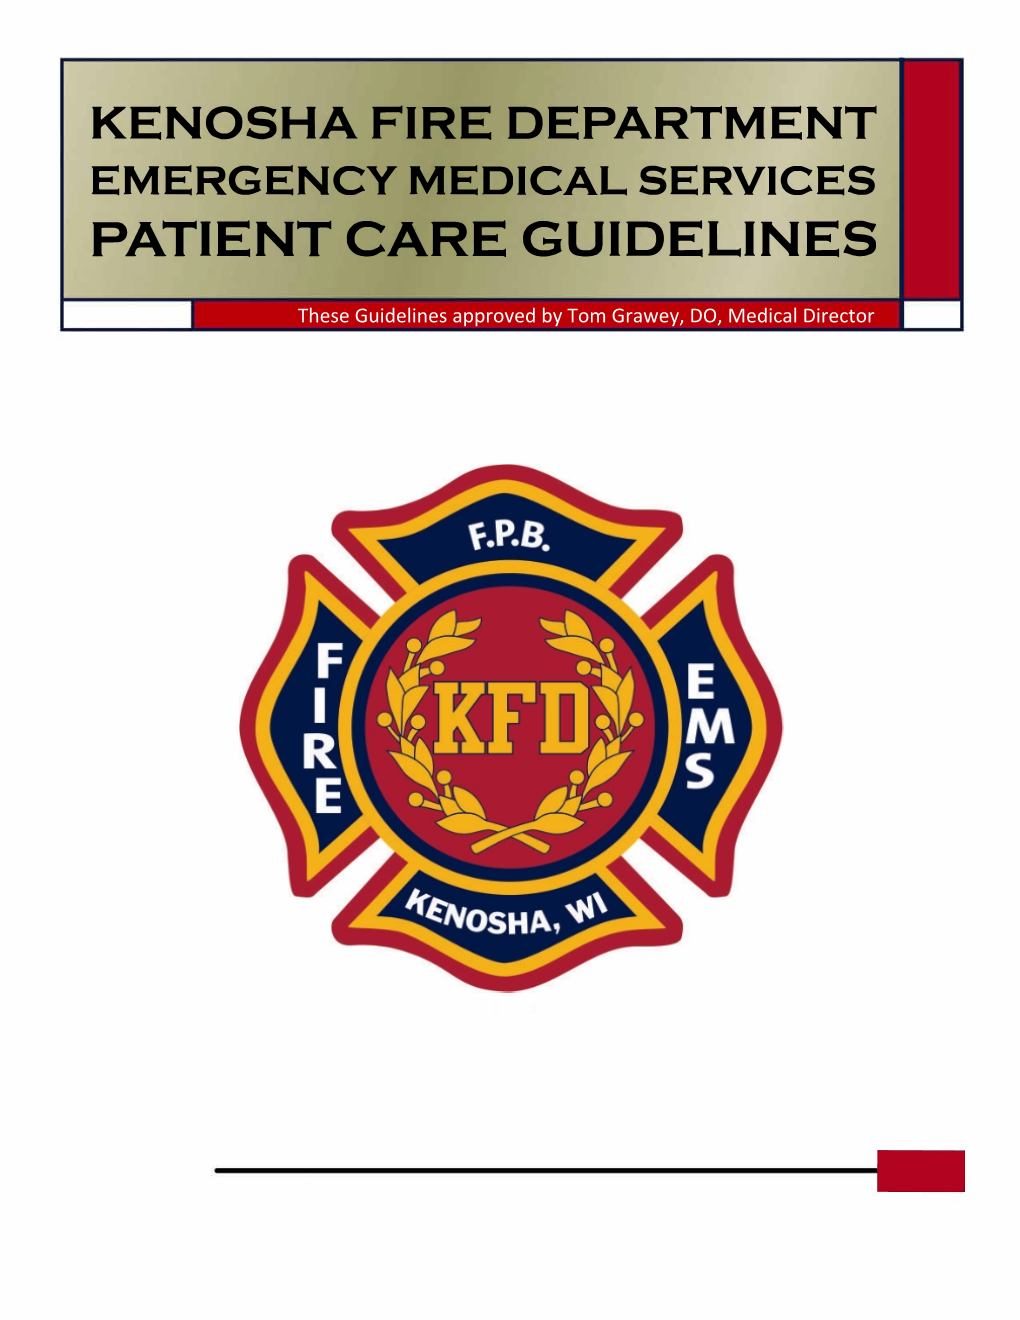 Emergency Medical Services Patient Care Guidelines